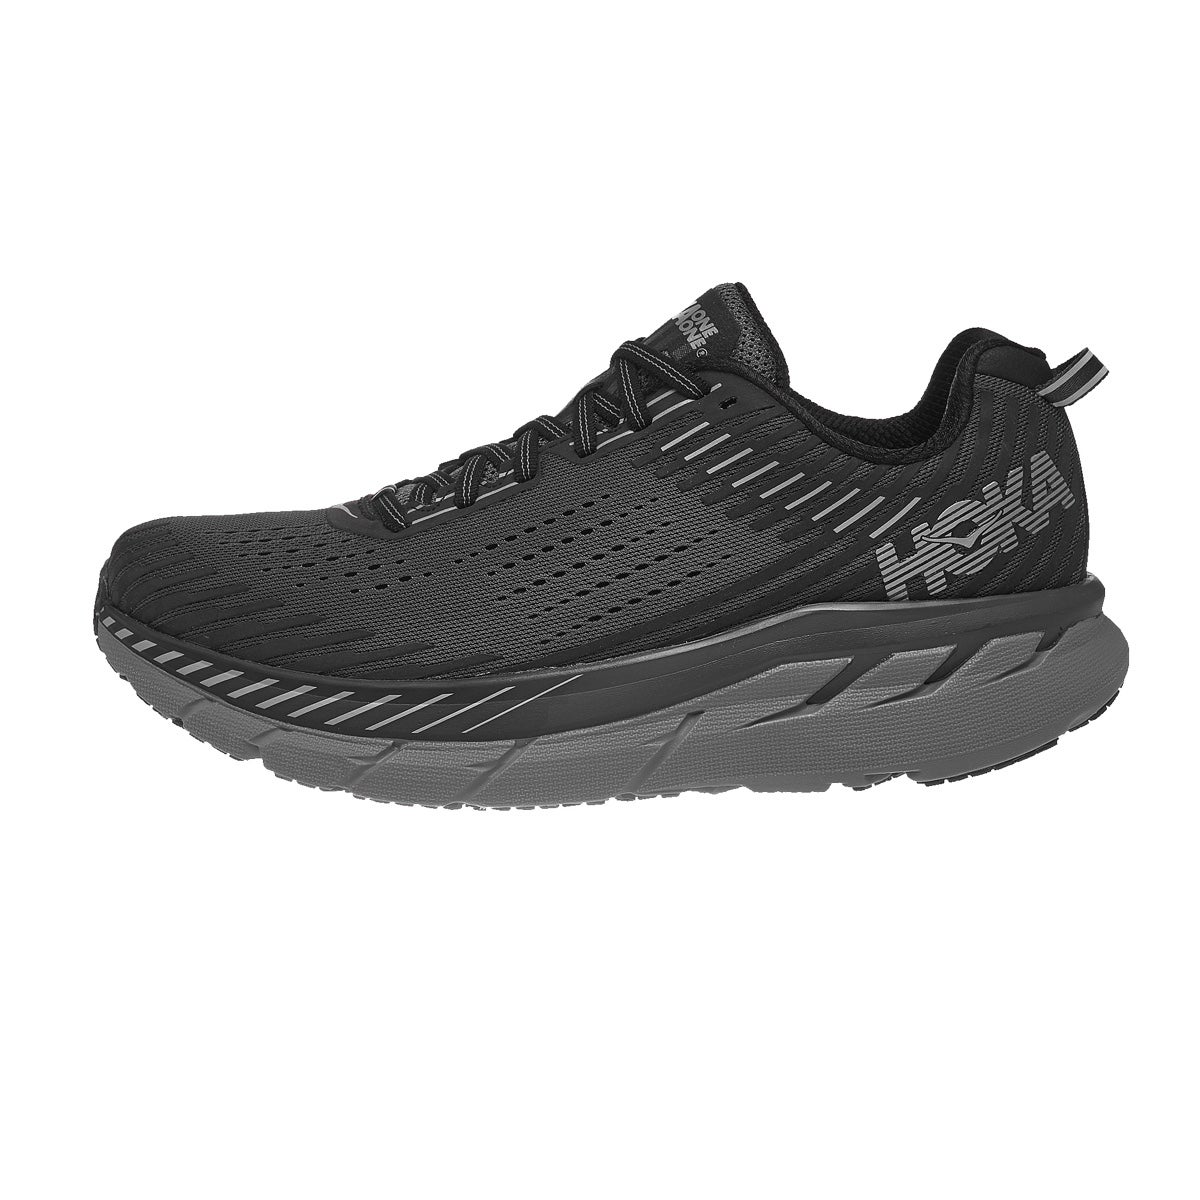 HOKA ONE ONE Clifton 5 Men's Shoes Anthracite/Shadow 360° View ...